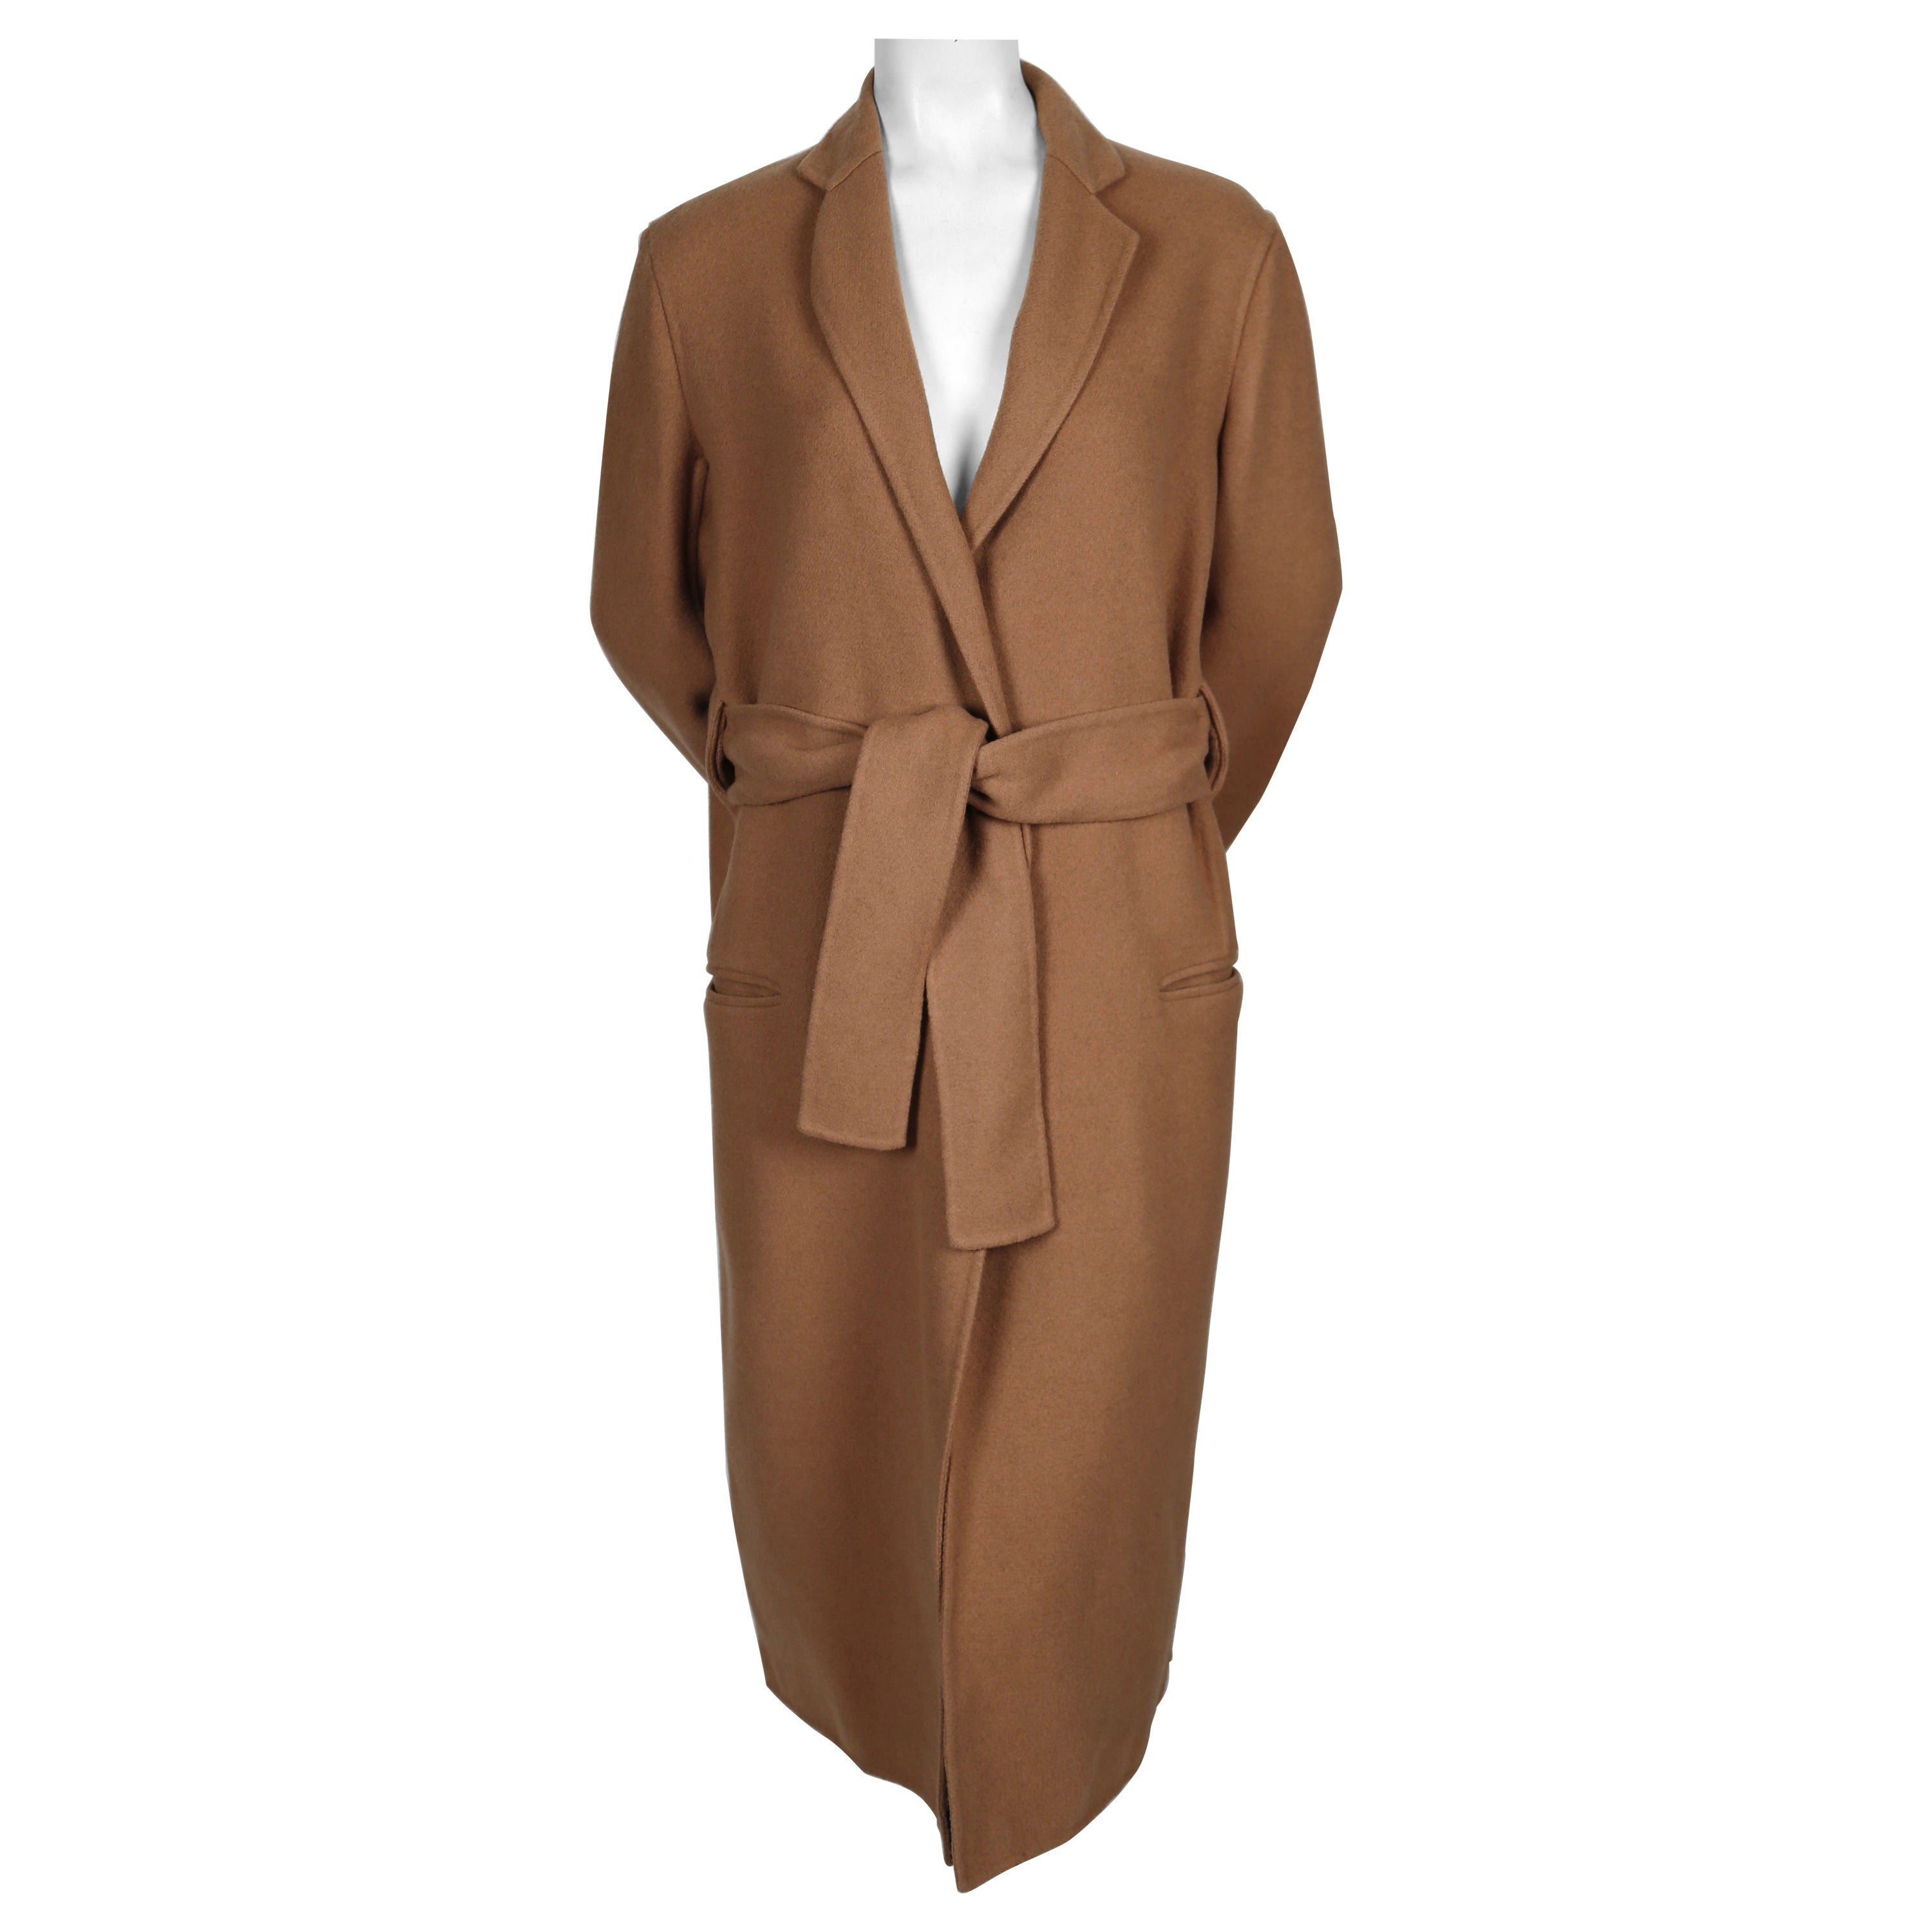 Celine by Phoebe Philo camel cashmere coat with belt   For Sale